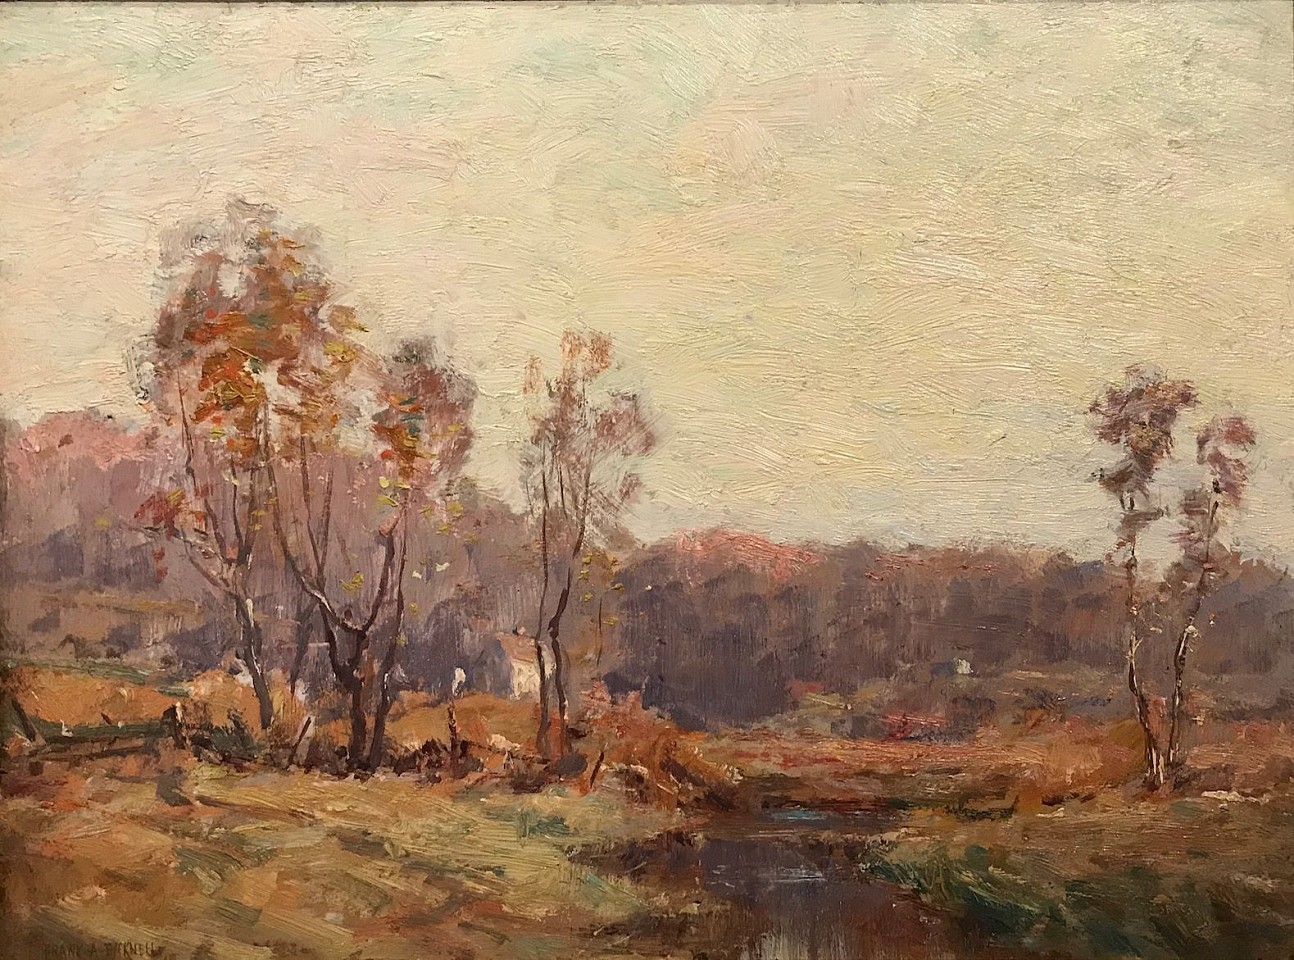 Frank Alfred Bicknell, An October Afternoon
oil on board, 12"" x 16""
JCA 6315
$4,500